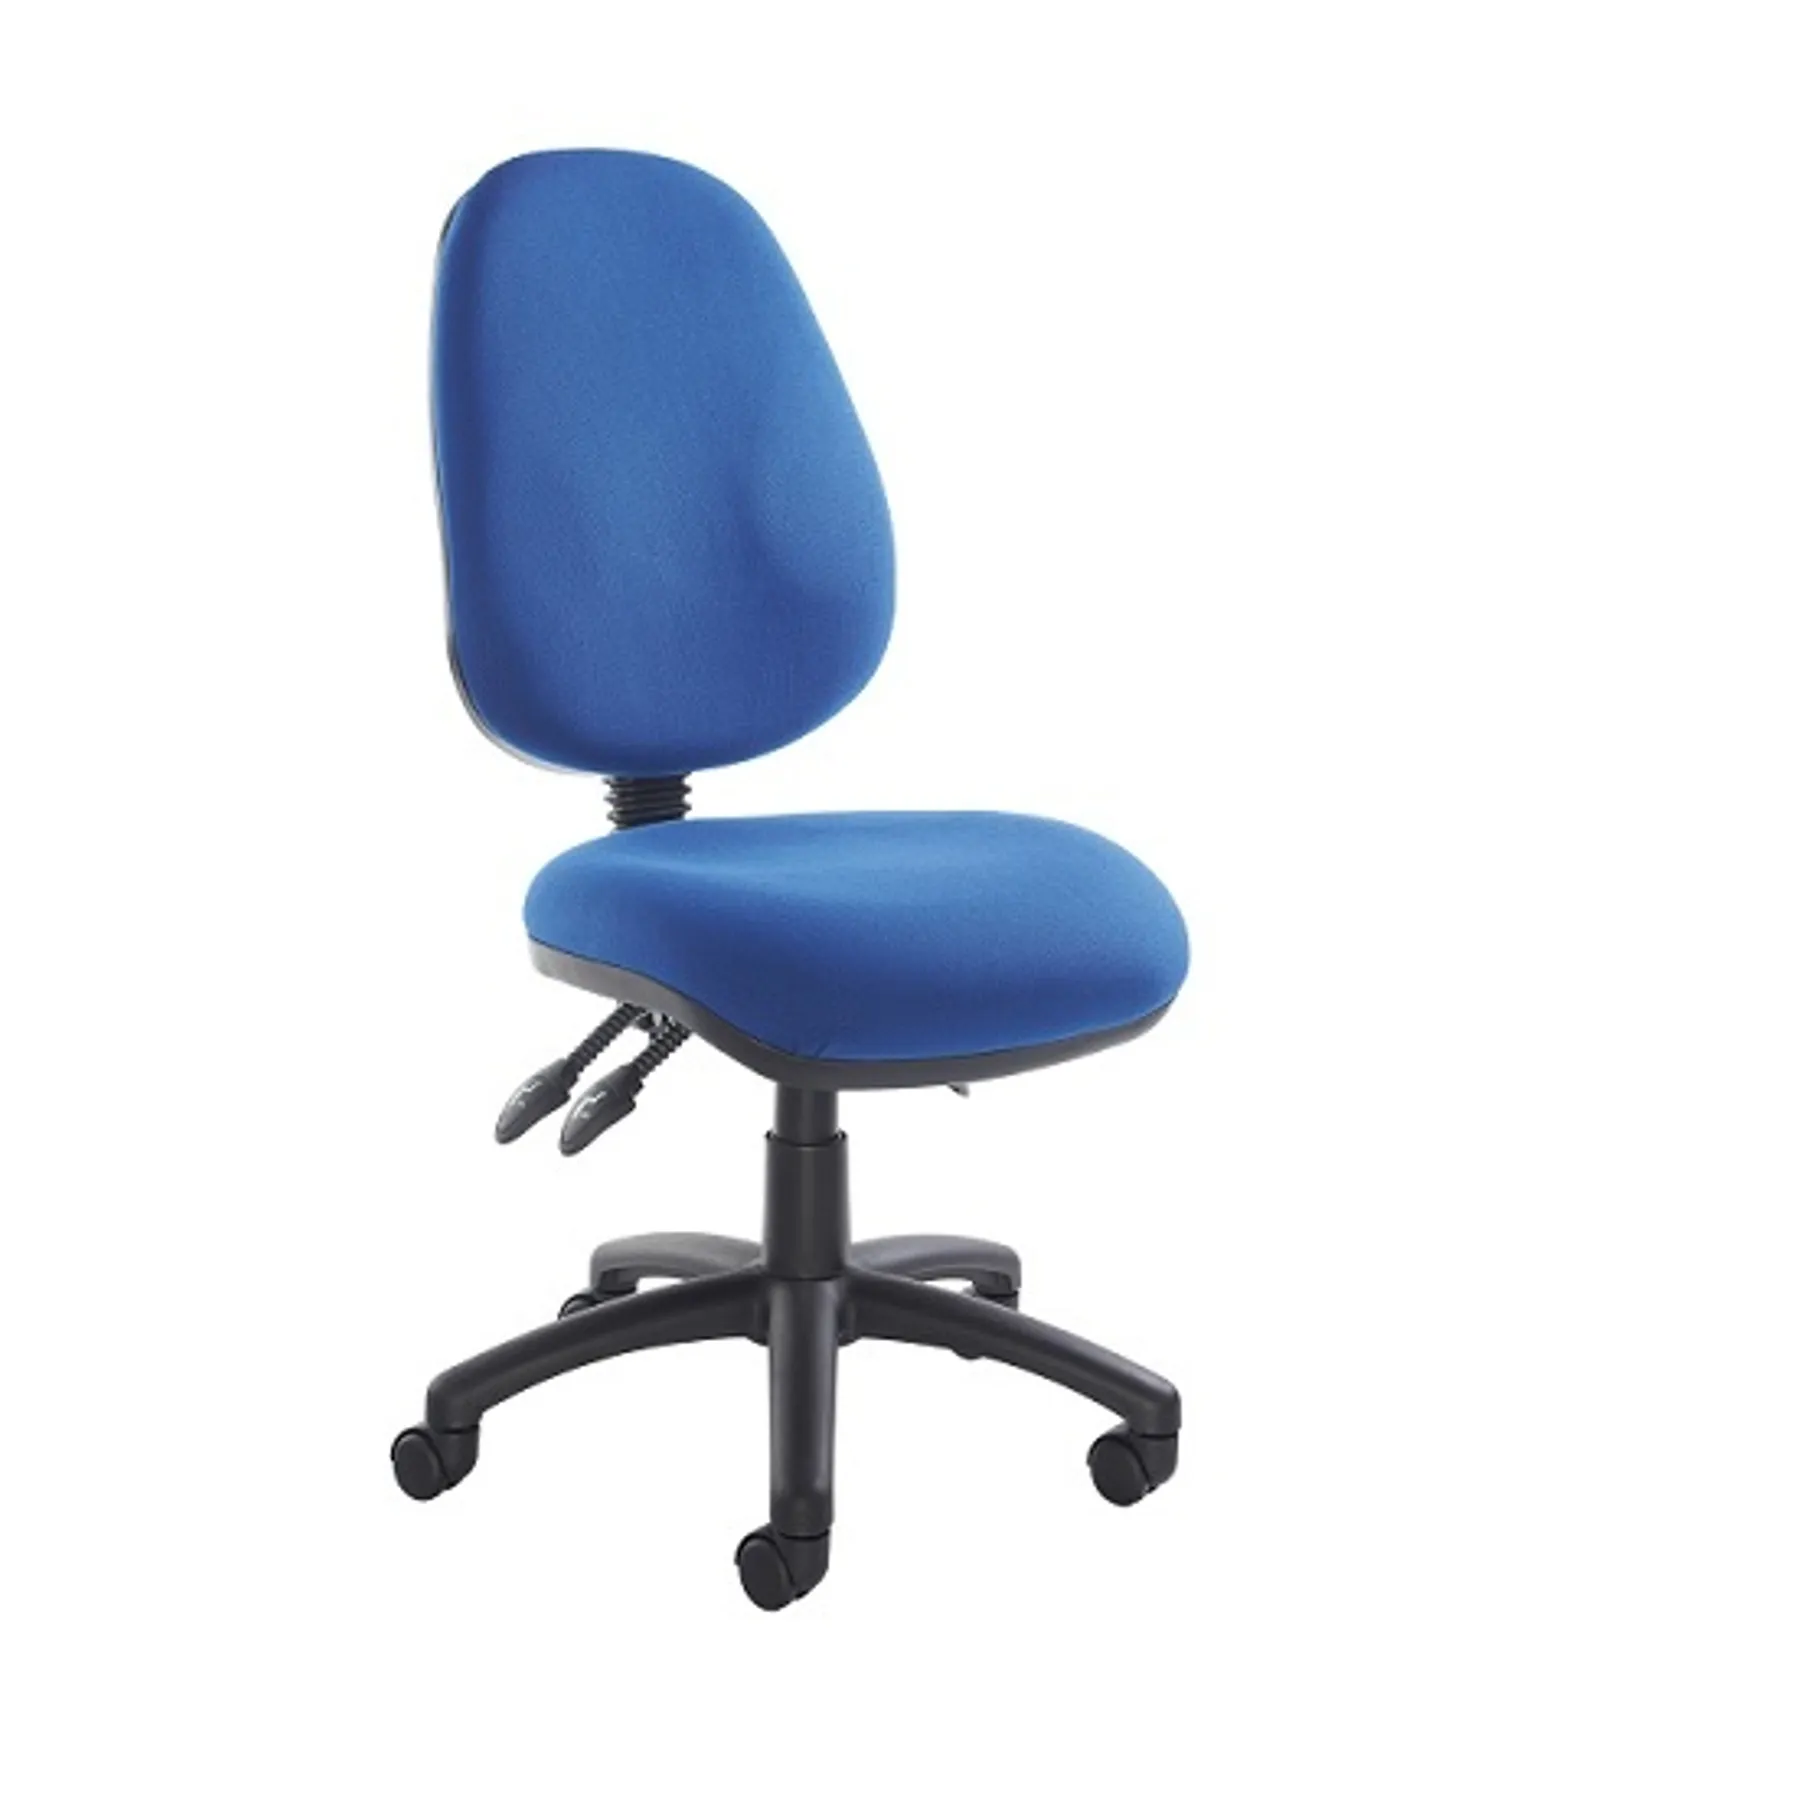 Lof direct dams vantage 200 operator chair with no arms V200 00 B